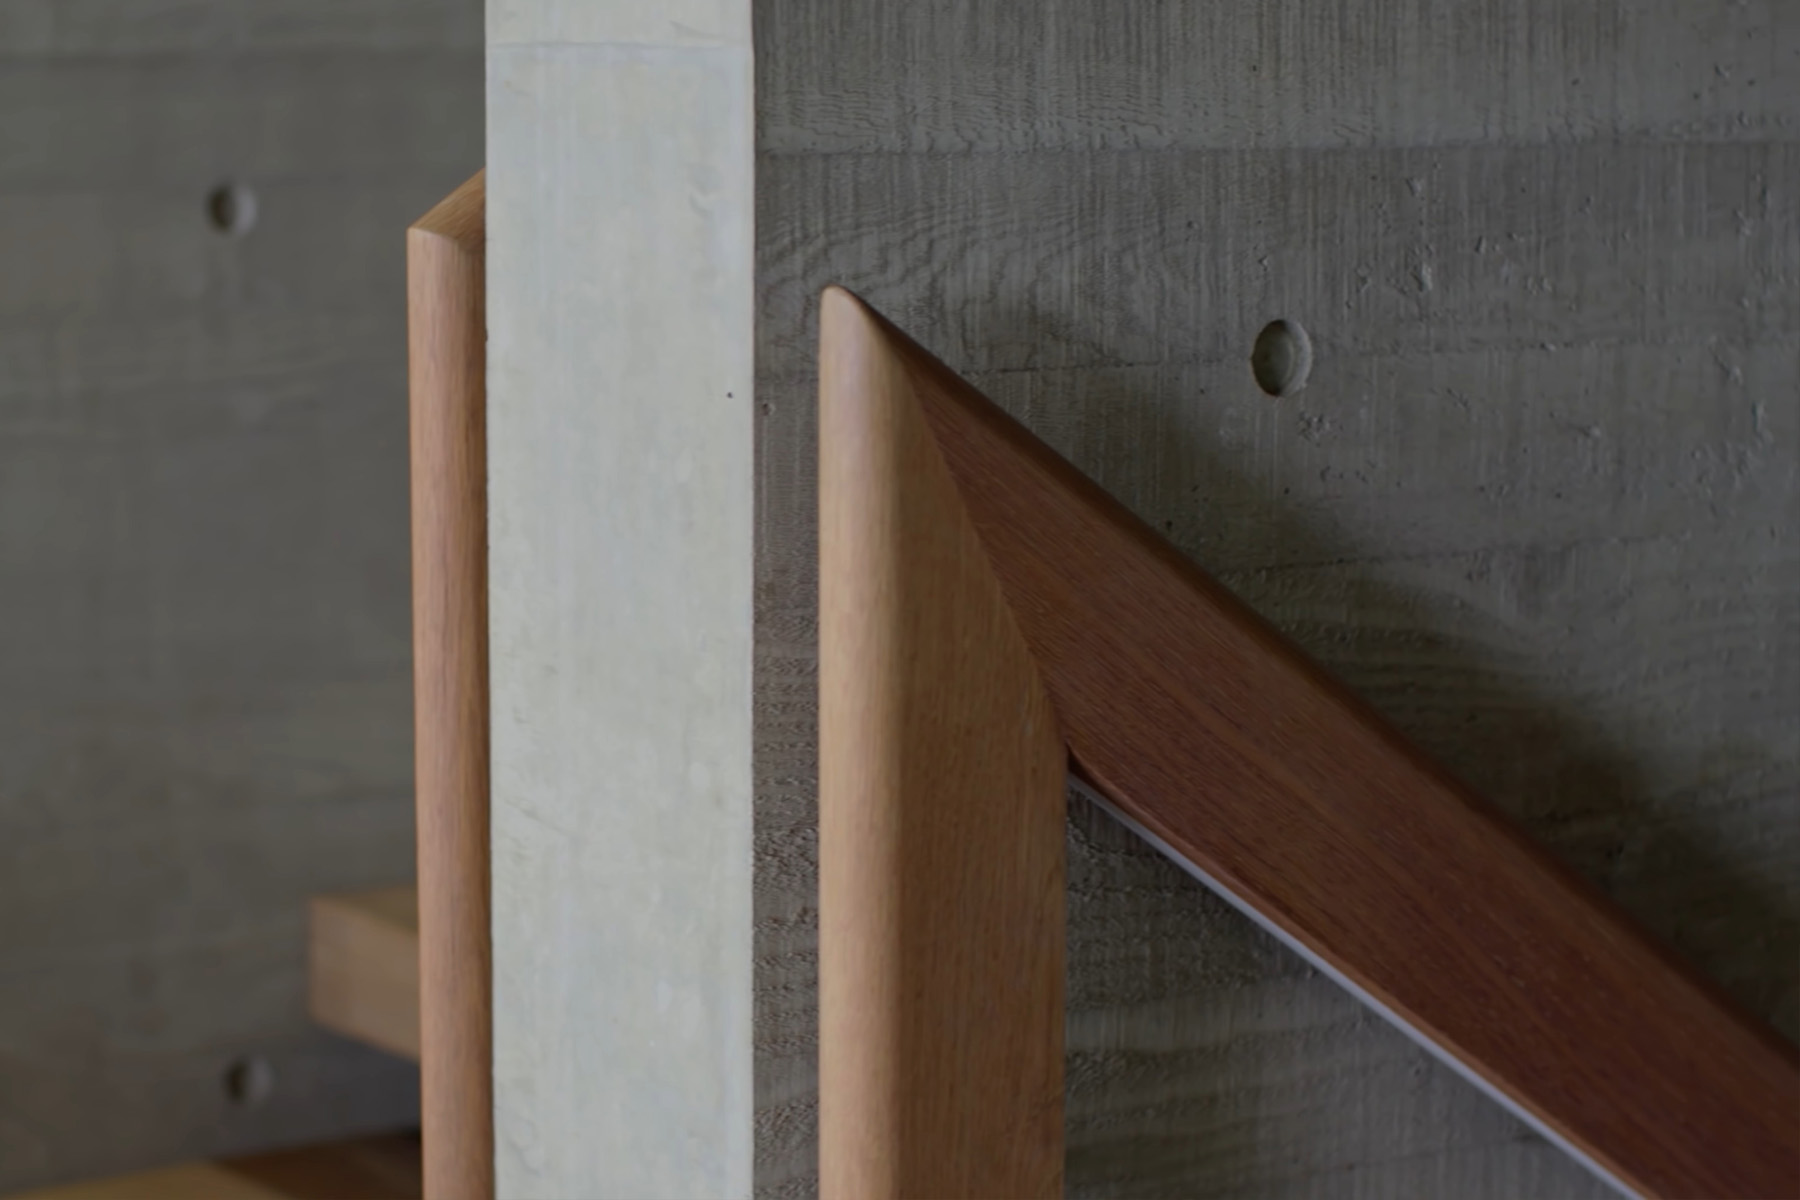 poured concrete wall closeup pic with wood handrail